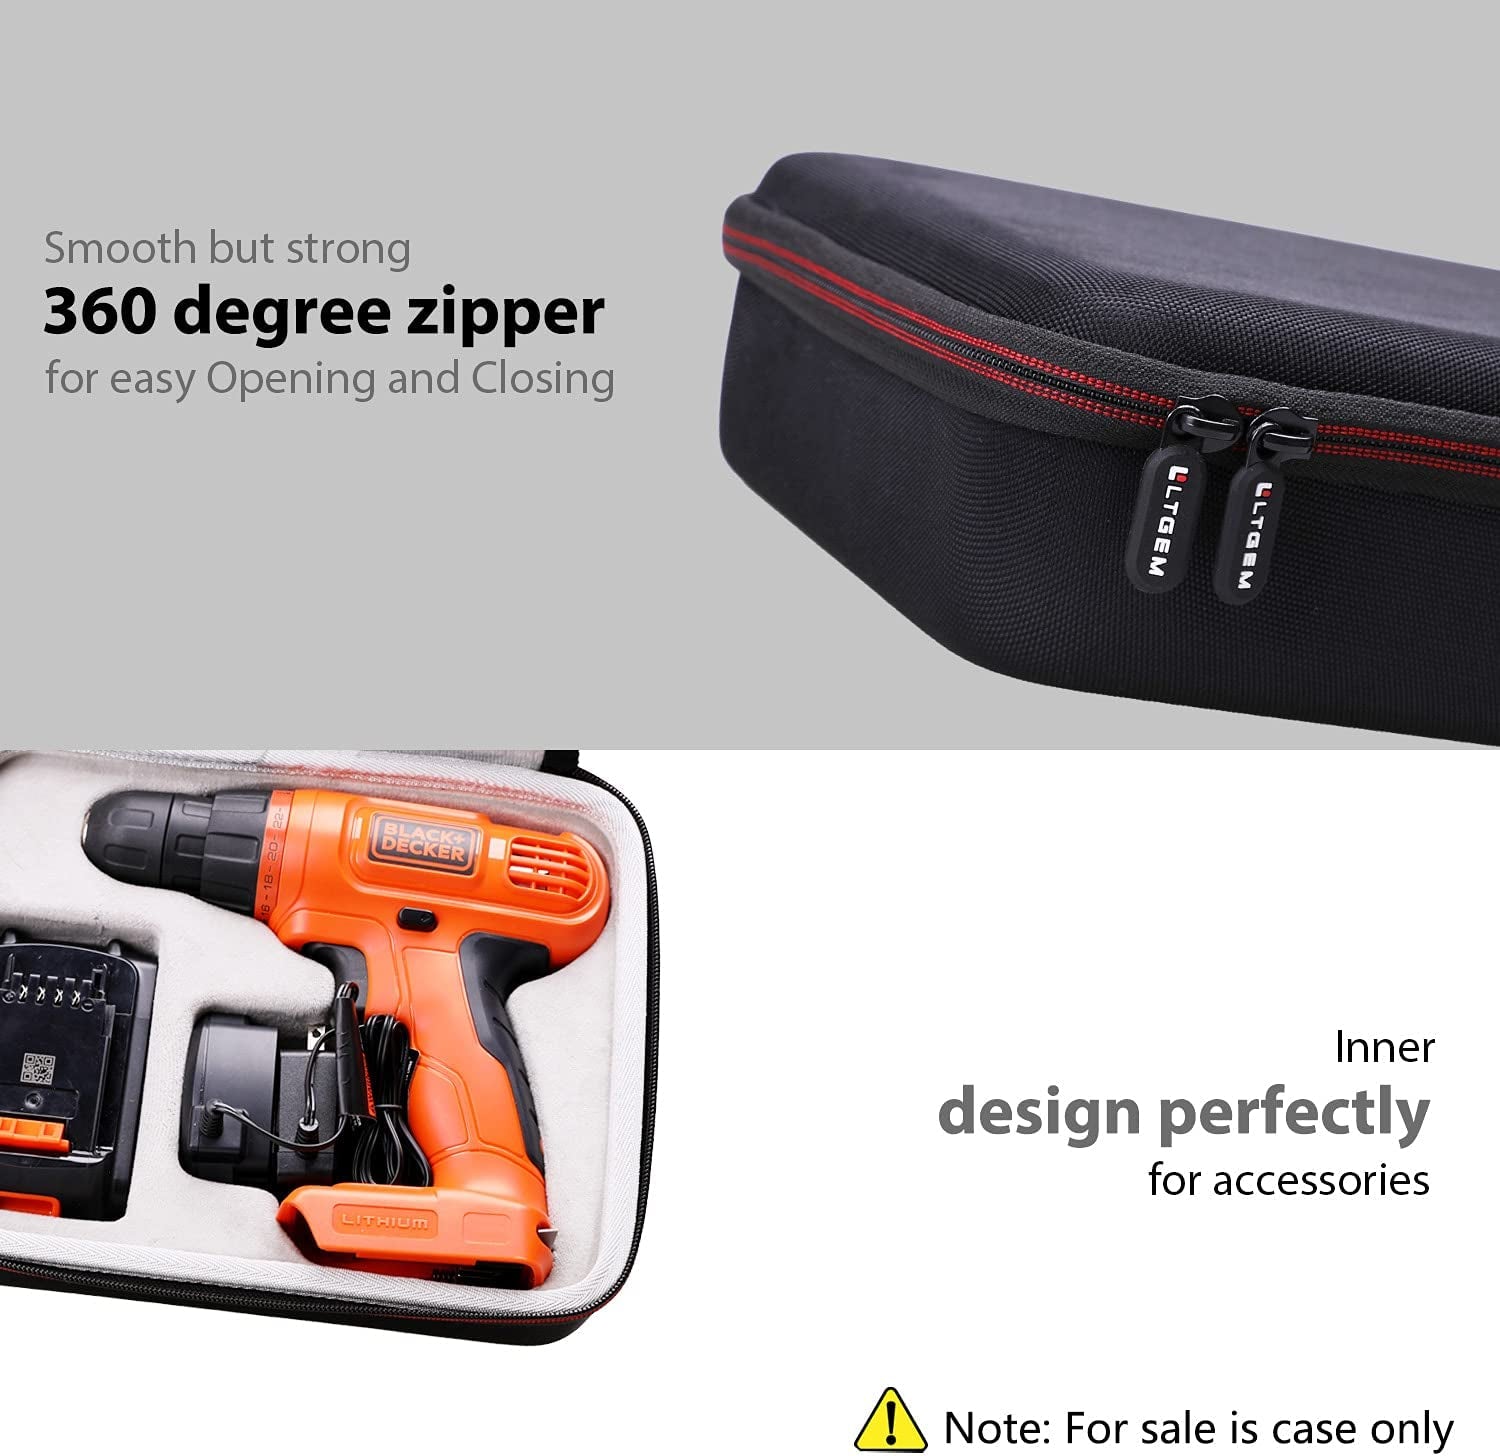 EVA Hard Case for DECKER 20V MAX Cordless Drill (LDX120C/LD120VA) and Accessories - Protective Carrying Storage Bag (Sale Case Only)